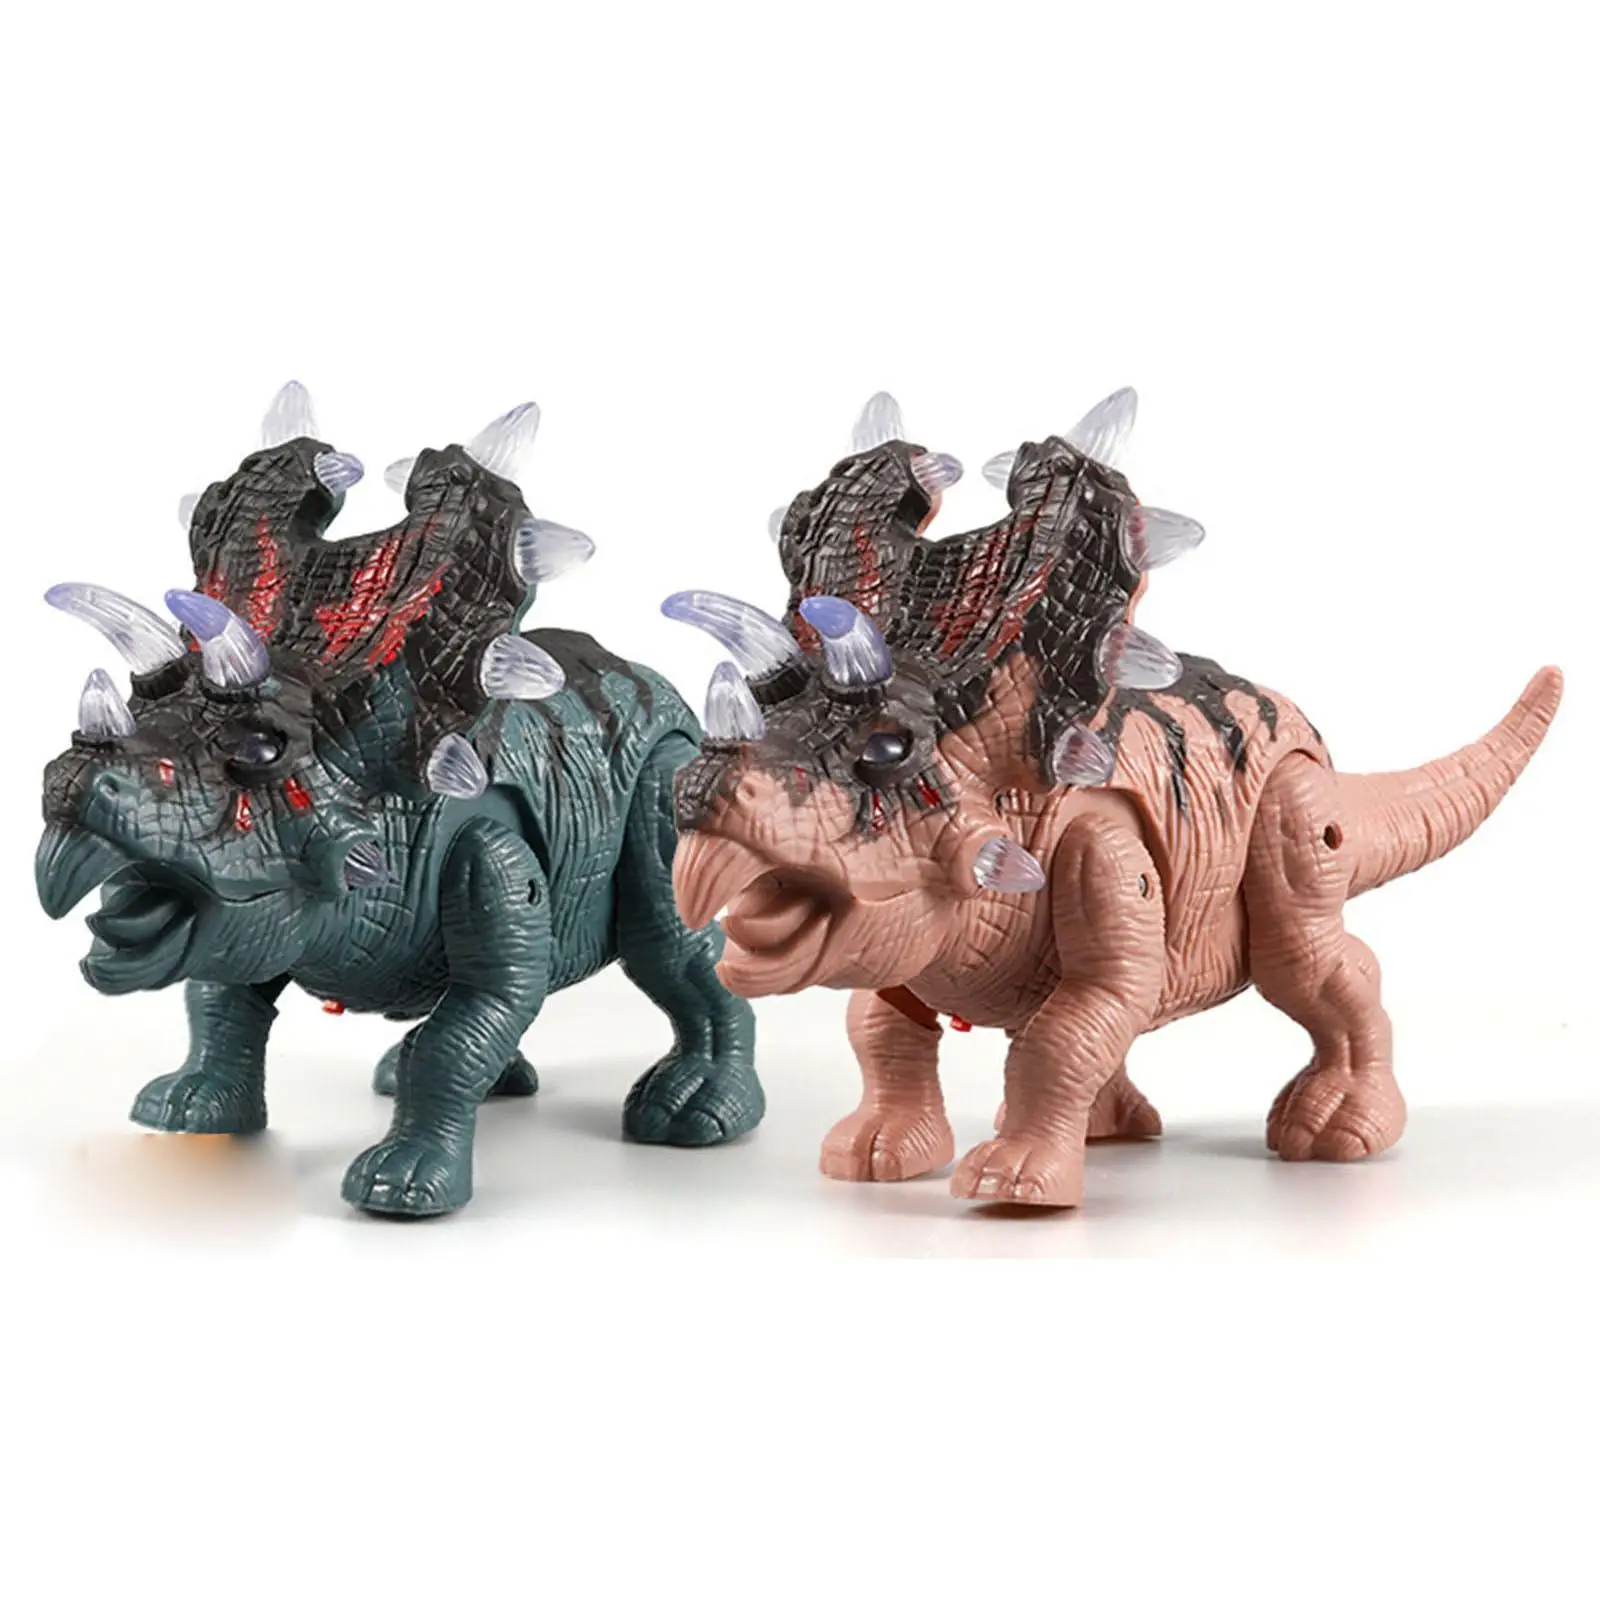 Realistic Dinosaur Toys Action Figure with Sounds for Kids Boys Holiday Present